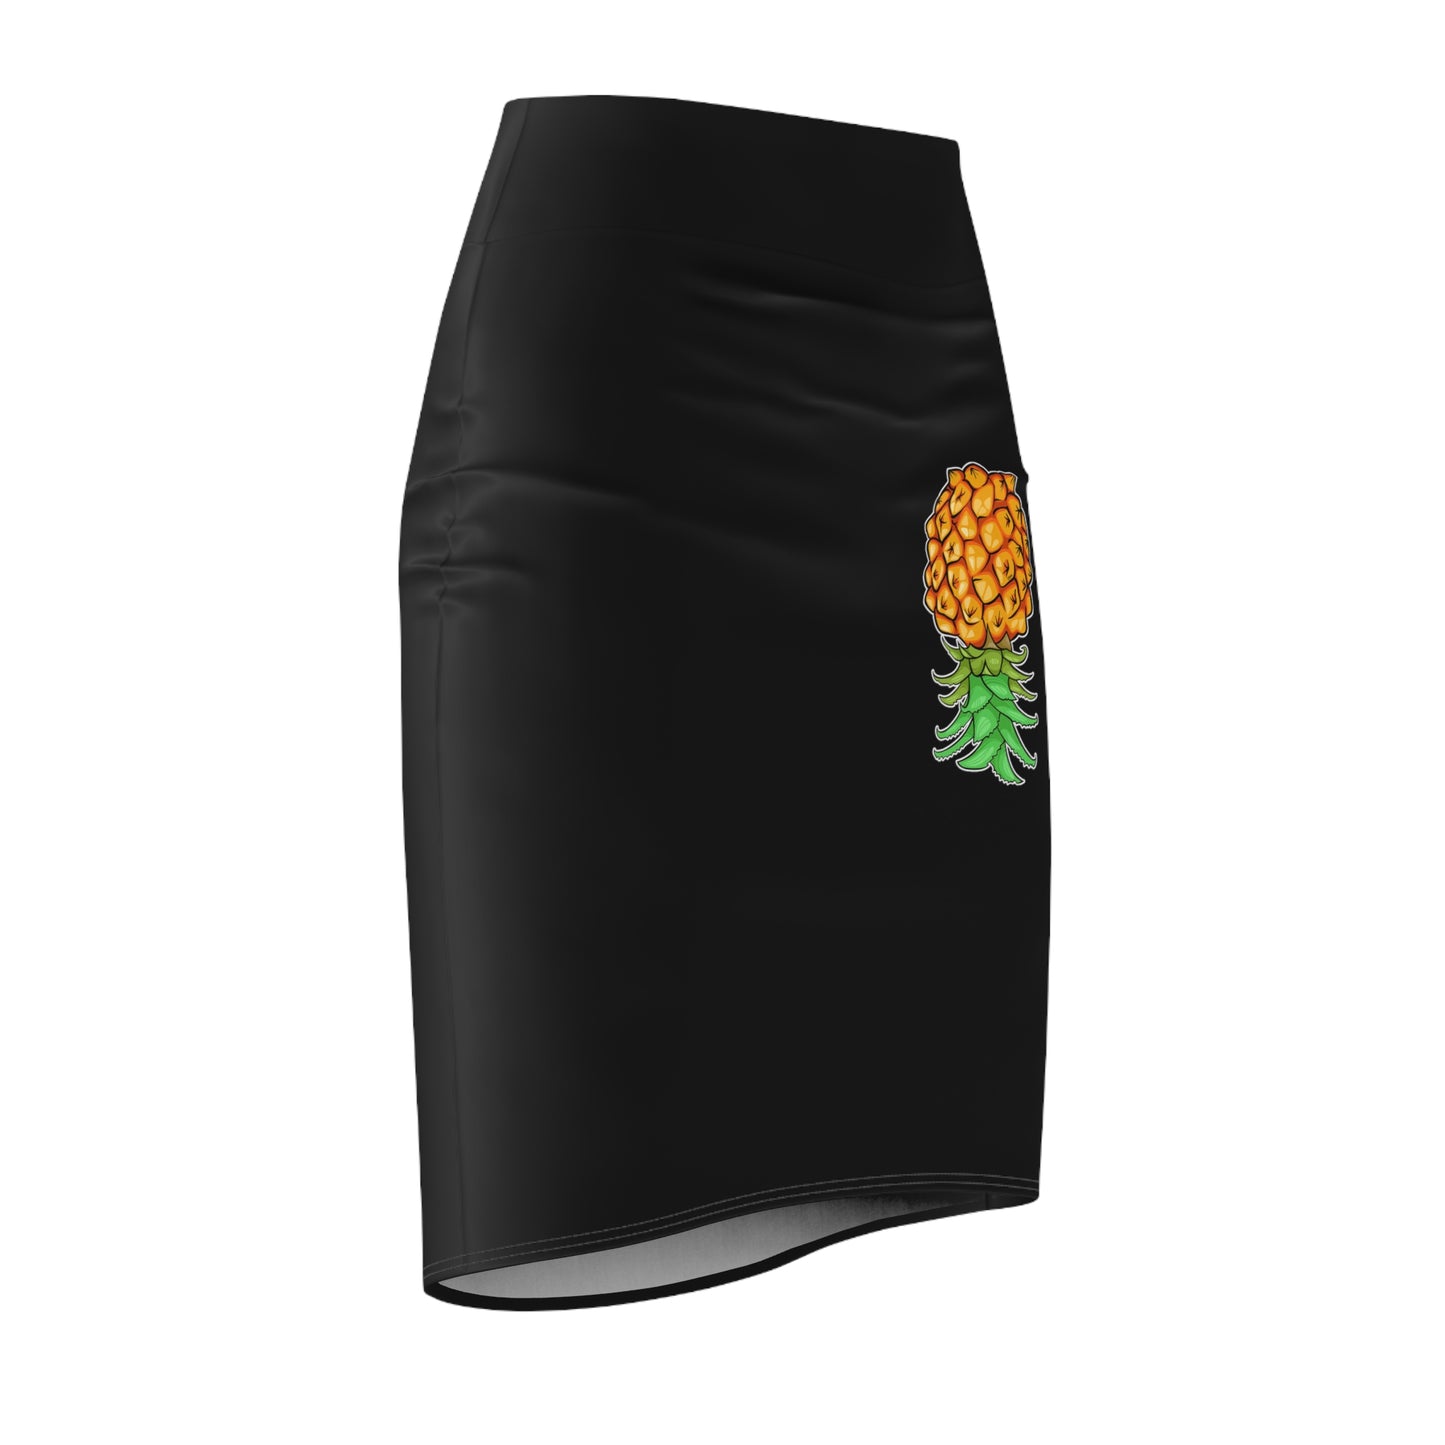 Upside Down Pineapple Mini Skirt If You Know You Know